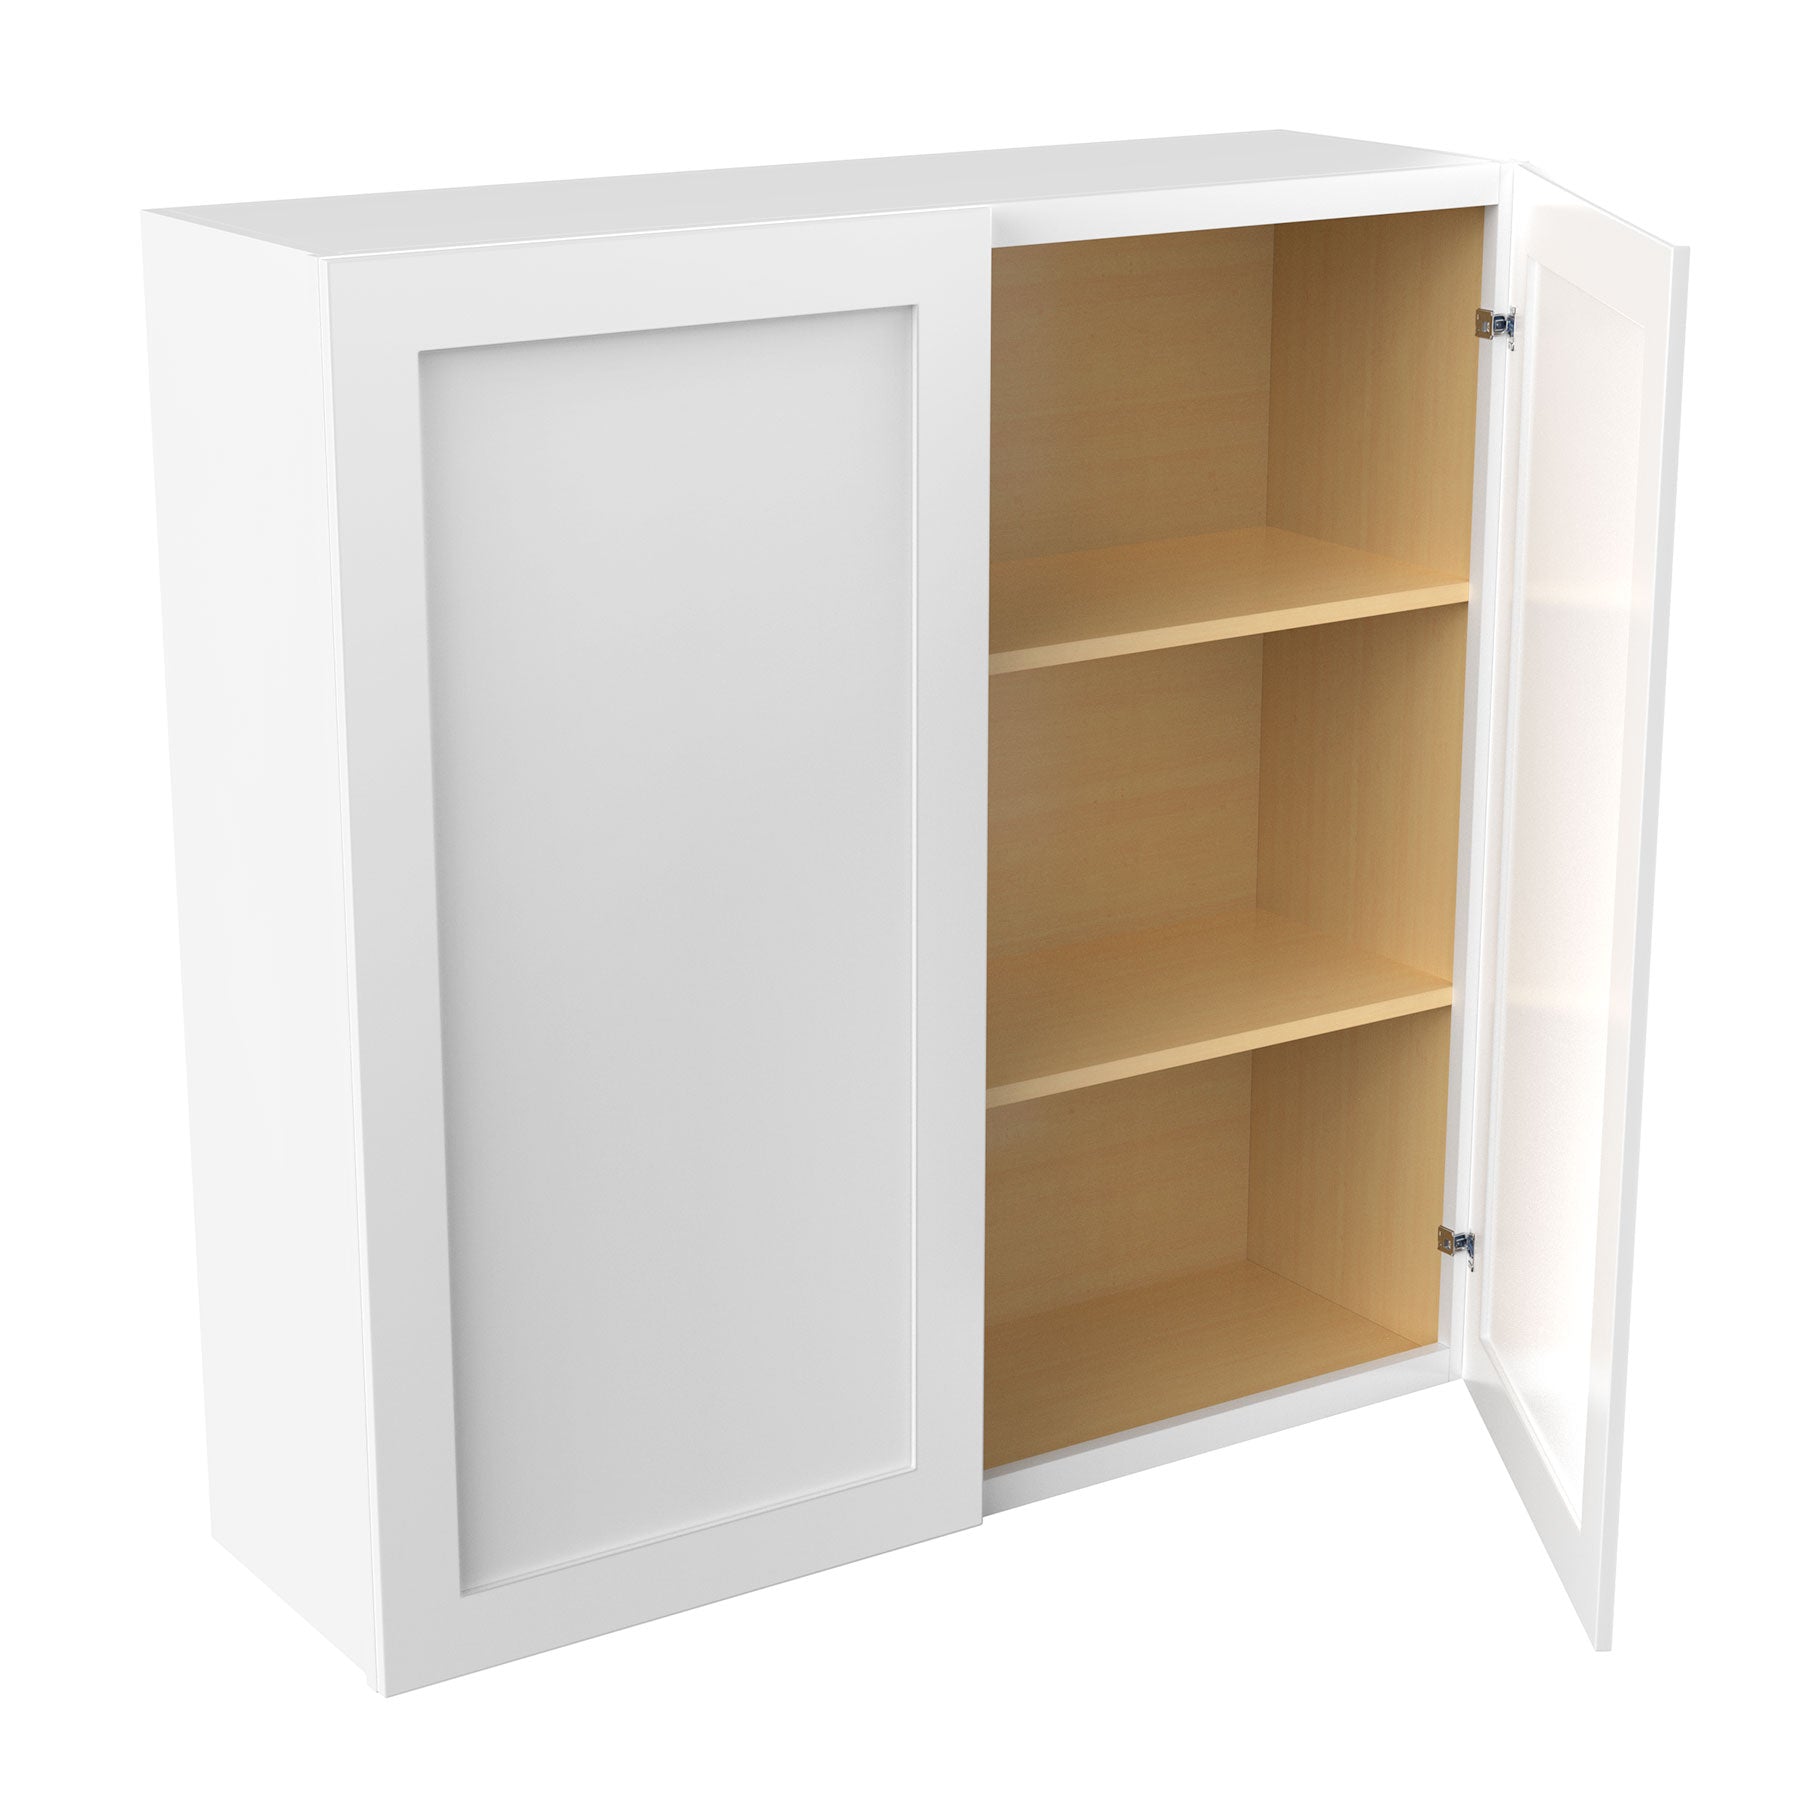 RTA - Elegant White - 42" High Double Door Wall Cabinet | 42"W x 42"H x 12"D